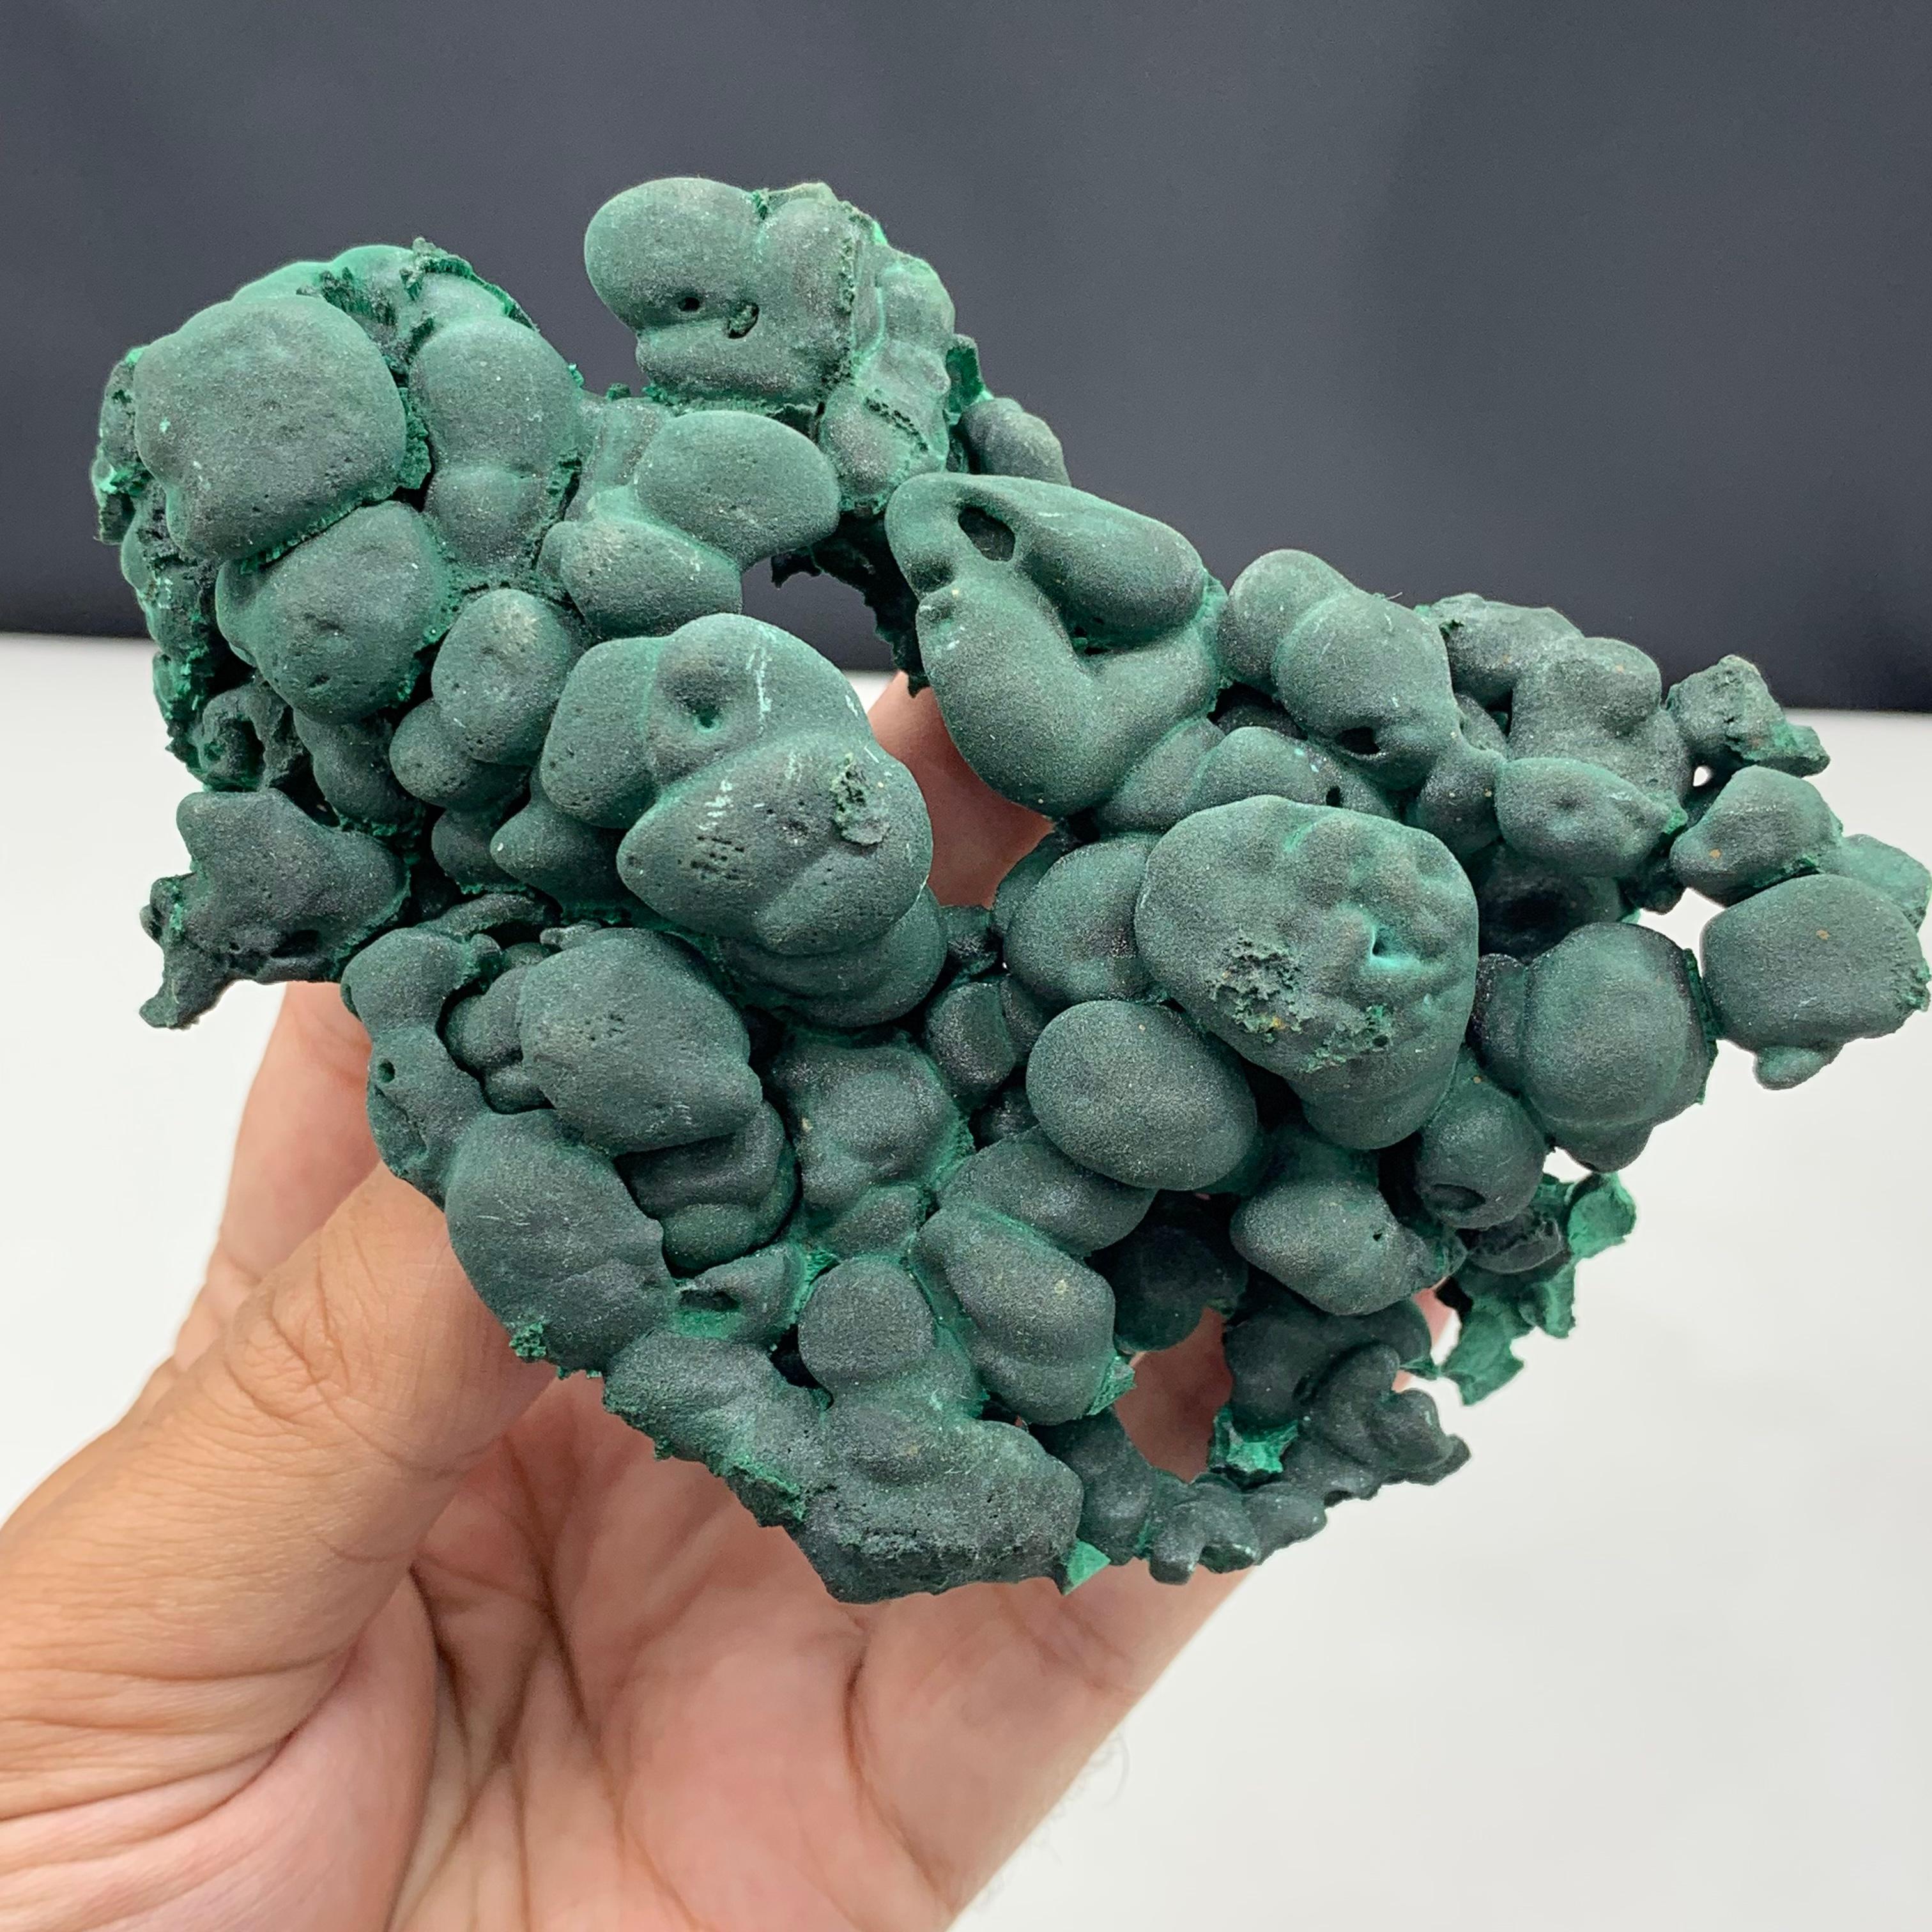 291 Gram Incredible Alien Eye Malachite Cluster Specimen From Guangdong, China  For Sale 11